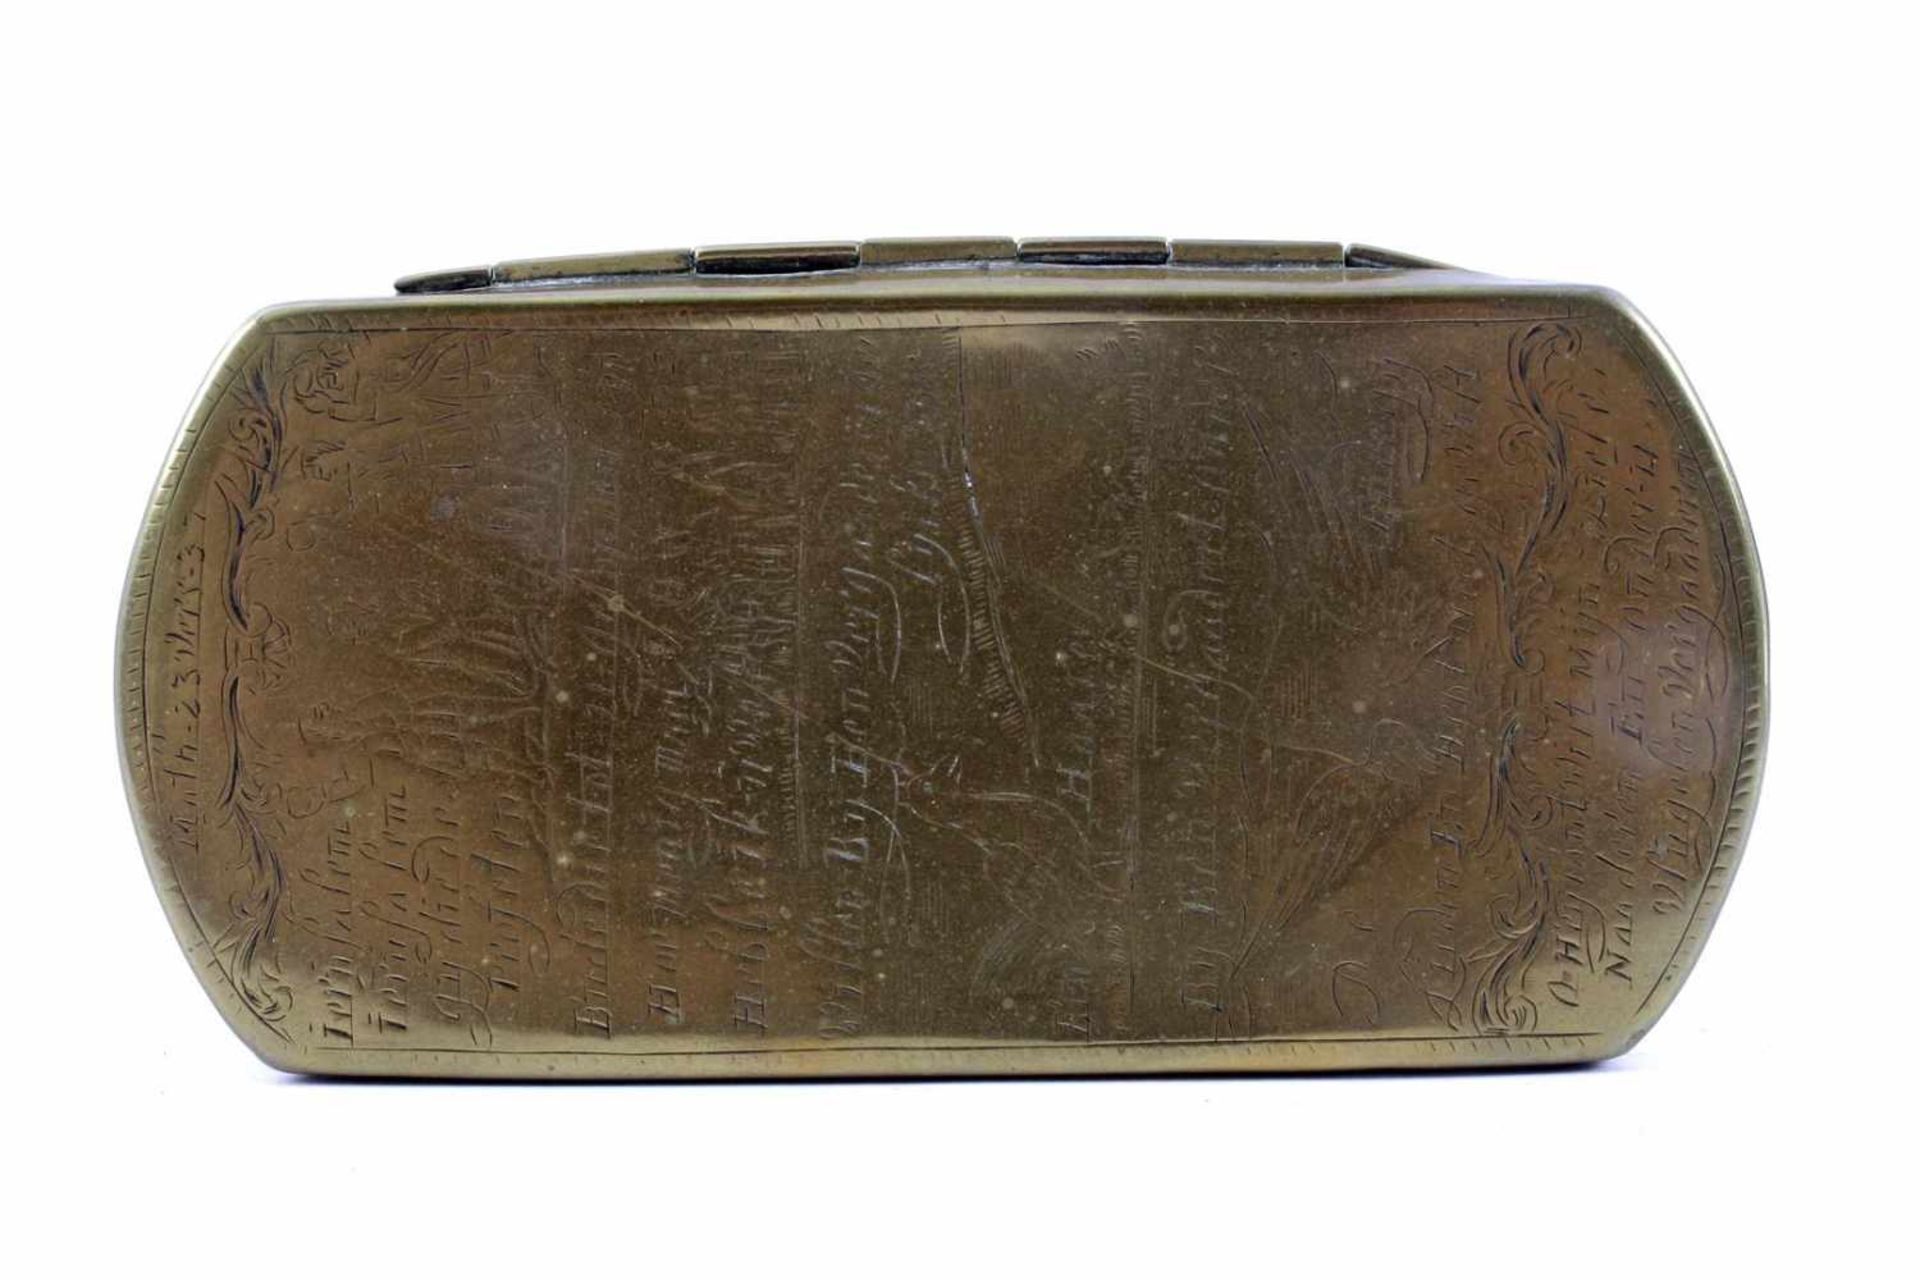 Copper 18th century tobacco box with etched decor and text Matthew 23 verse 37, 3 cm high, 15.7x8 - Image 2 of 4